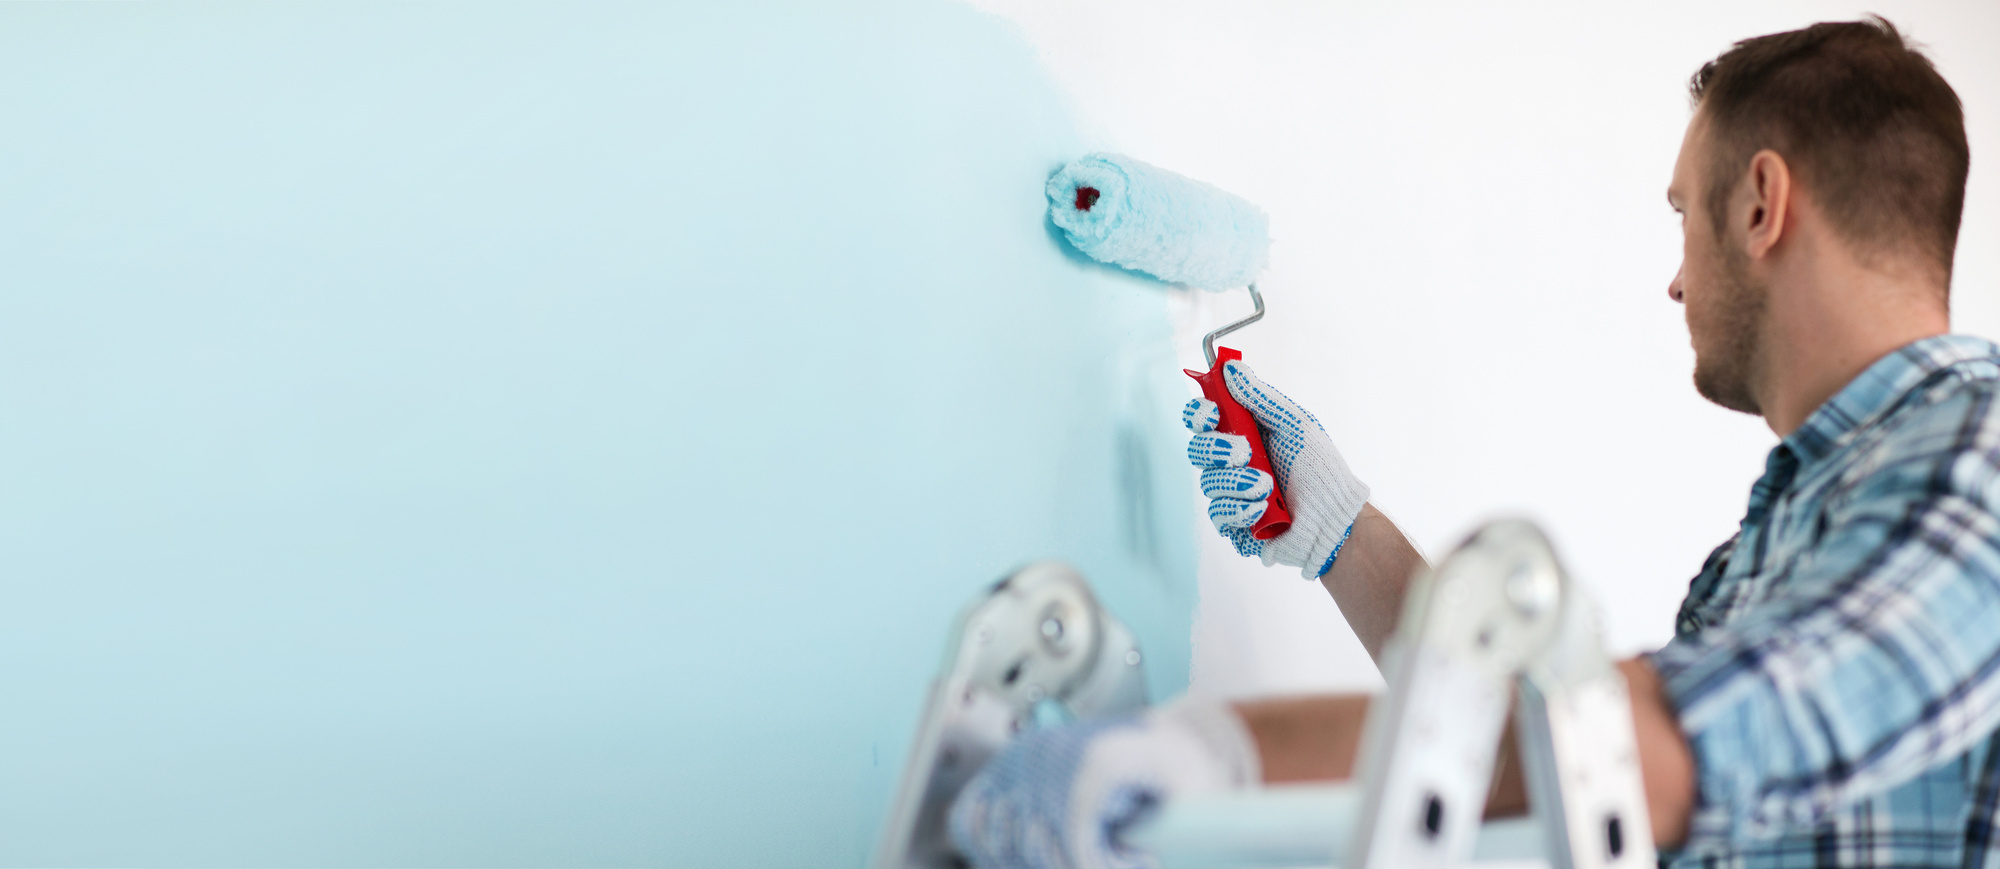 Having professional painters are key for any important project. Make sure you know these 5 major factors to consider before hiring a professional painter.